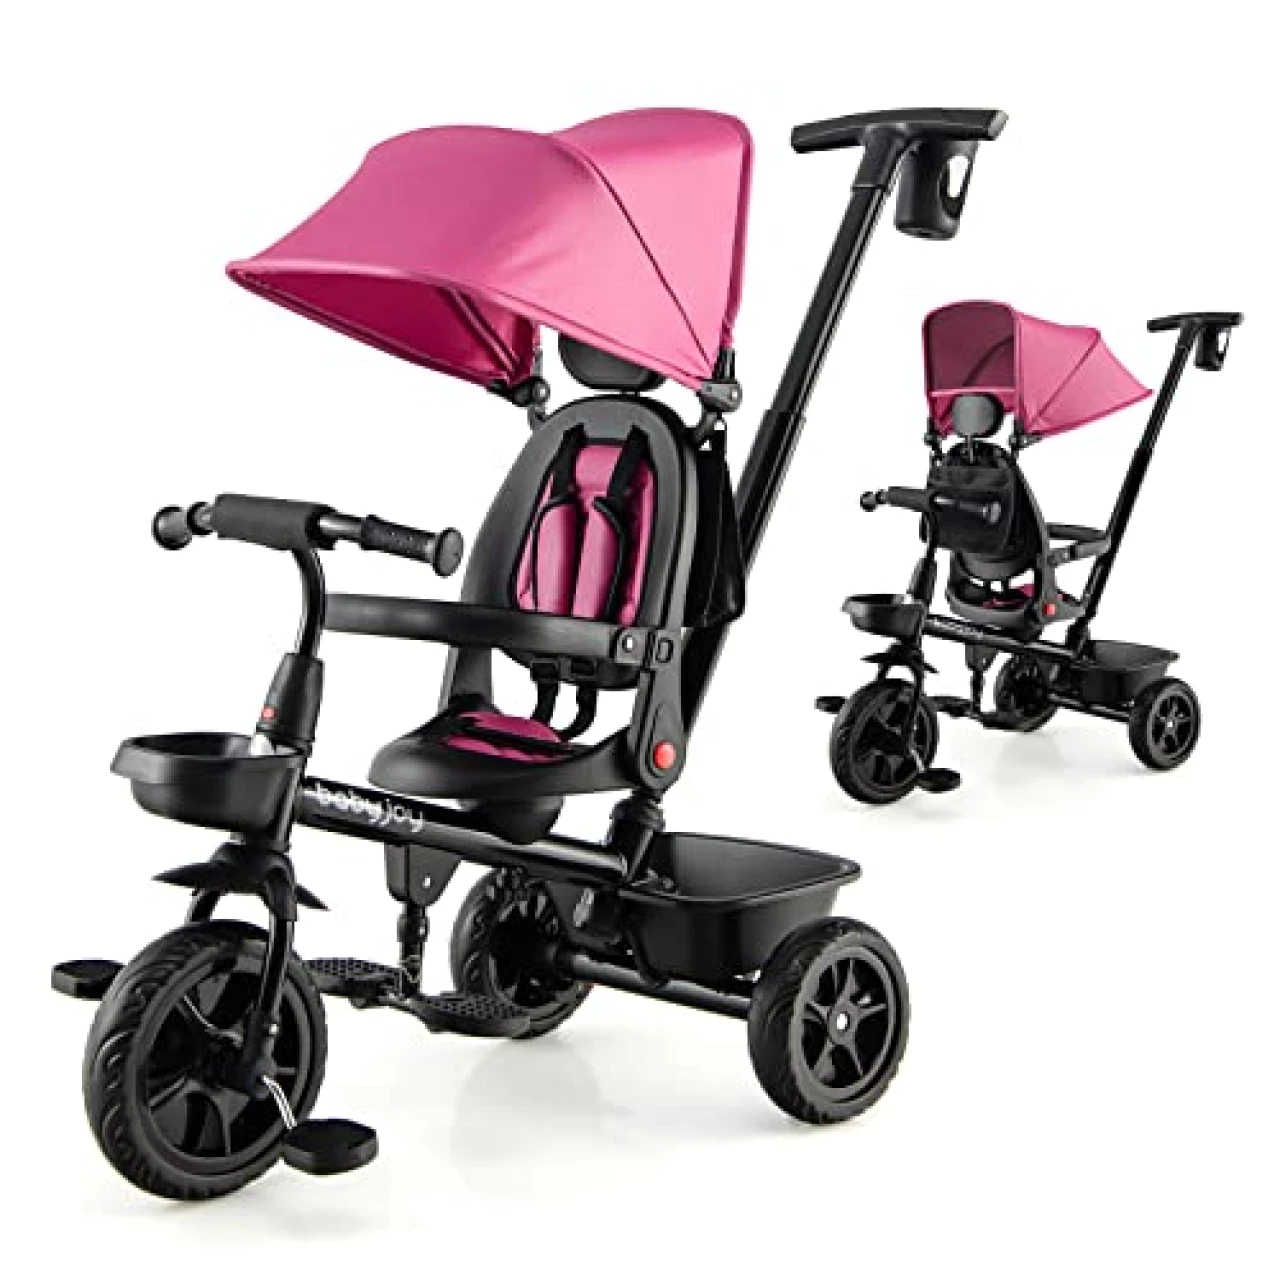 BABY JOY Tricycle, 4 in 1 Toddler Bike W/Removable Push Handle, Reversible Seat, Foldable Footrest, All-Terrain EVA Wheel, Adjustable Canopy, Ideal for Kids 12-60 Months, Tricycle for Toddler (Pink)